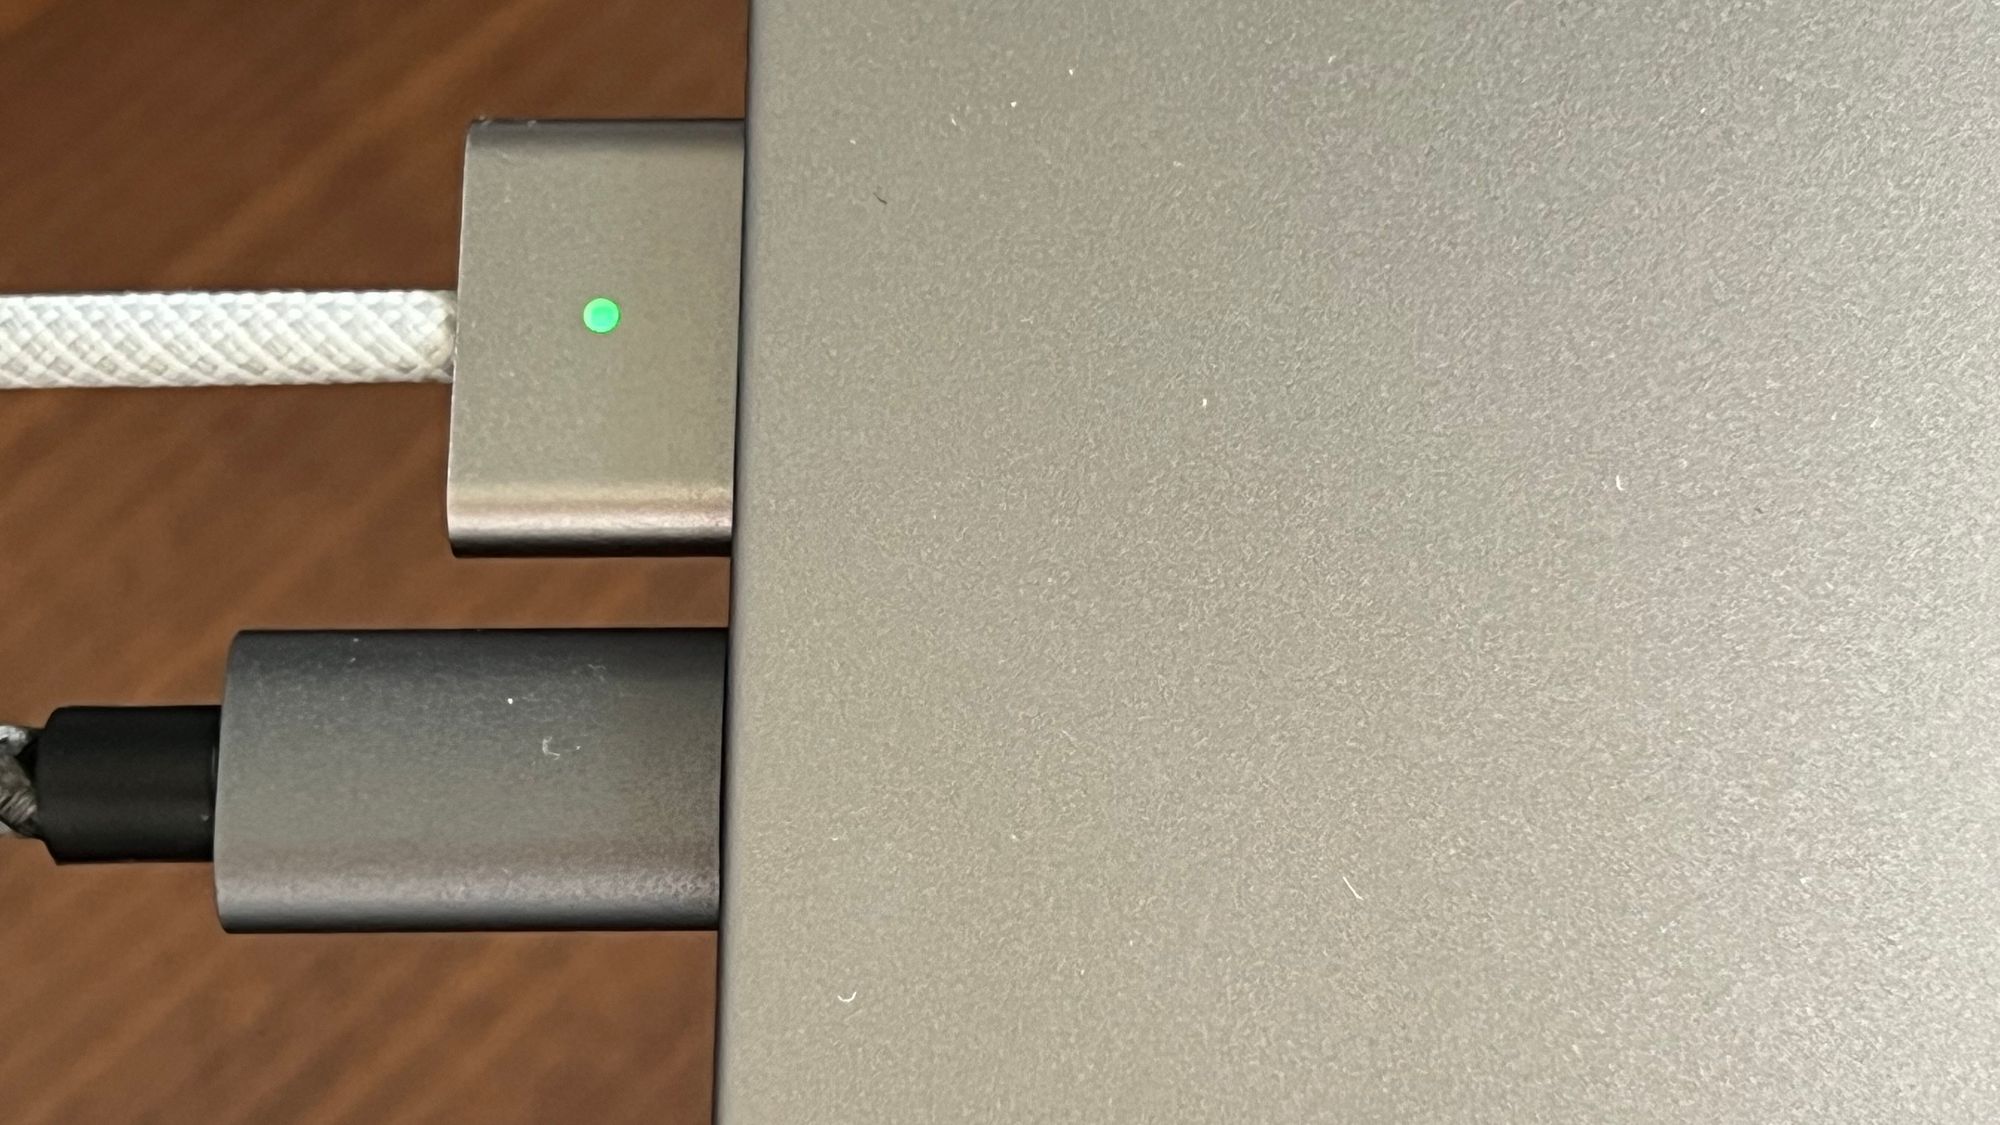 The return of MagSafe is like having an additional USB-C port